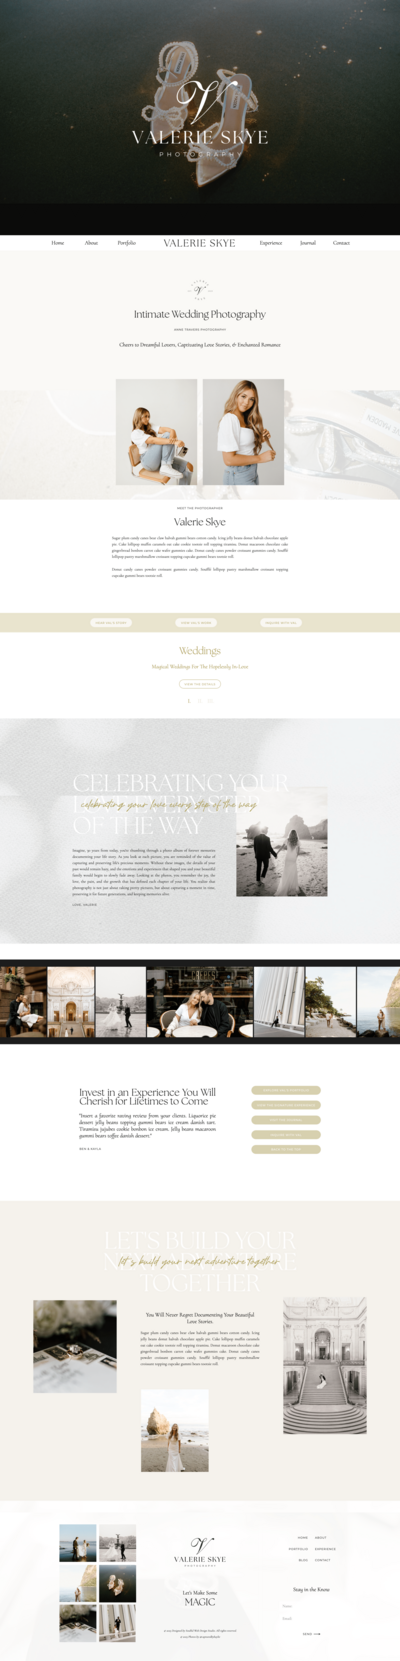 Valerie  Skye Showit website template for photographers and creatives.